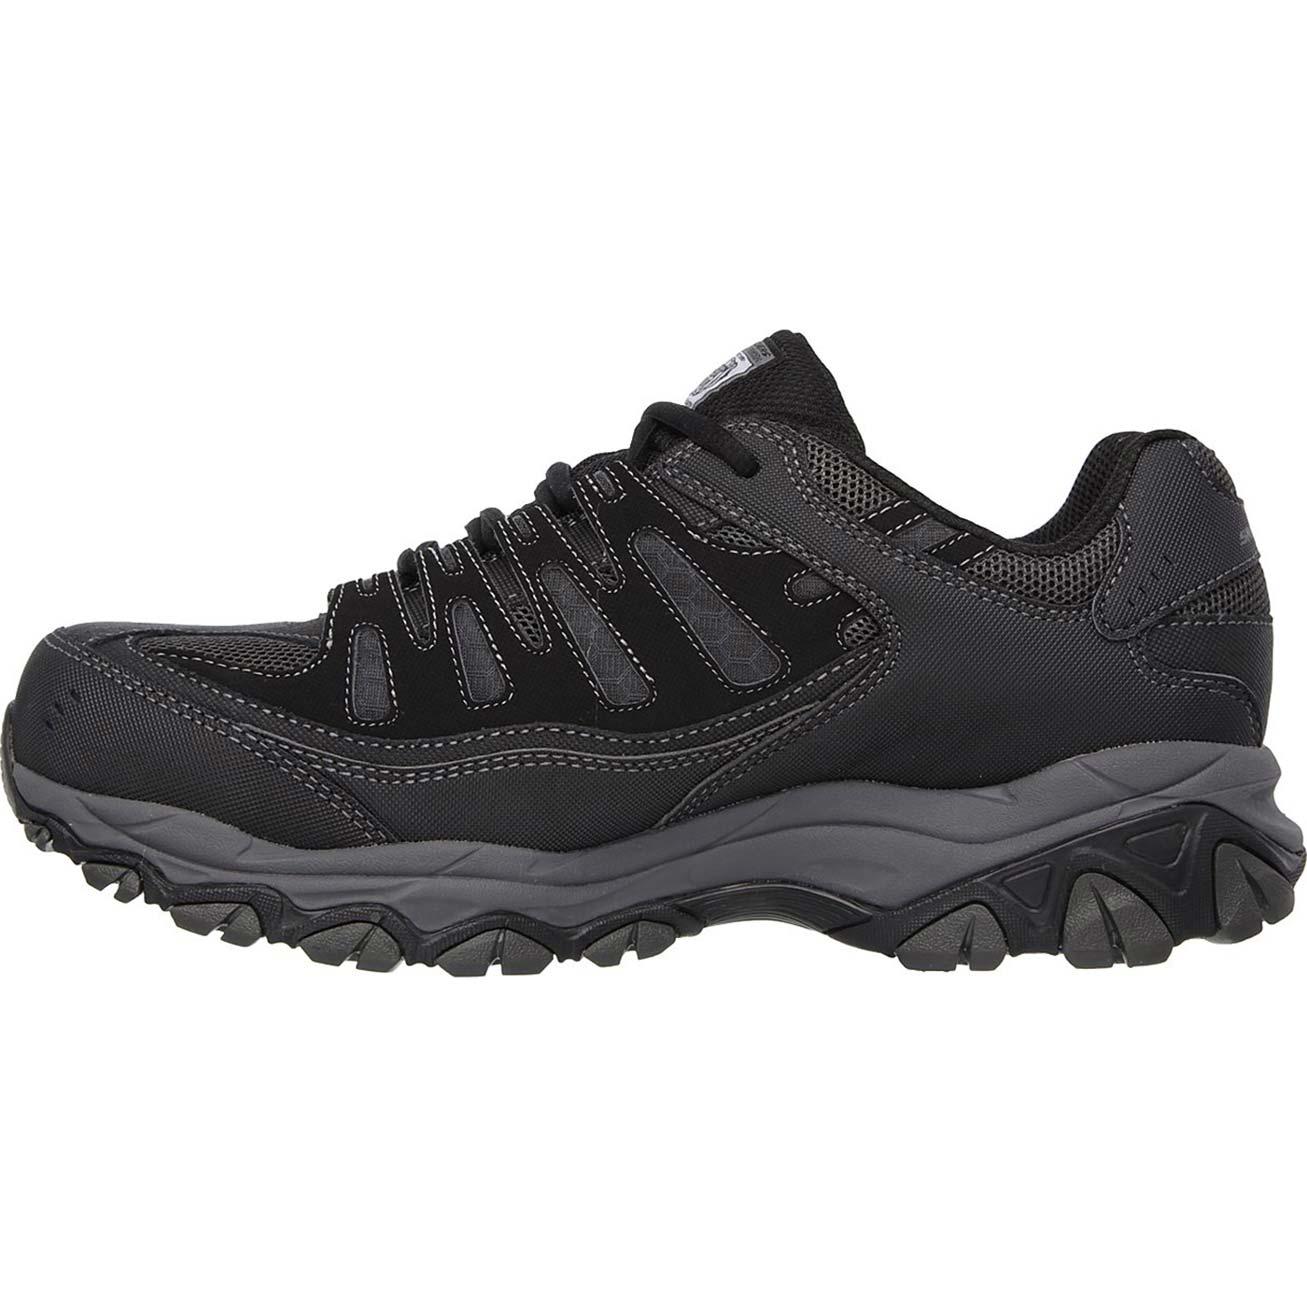 SKECHERS Work Relaxed Fit Crankton Steel Toe Work Athletic Shoe, 77055BKCC